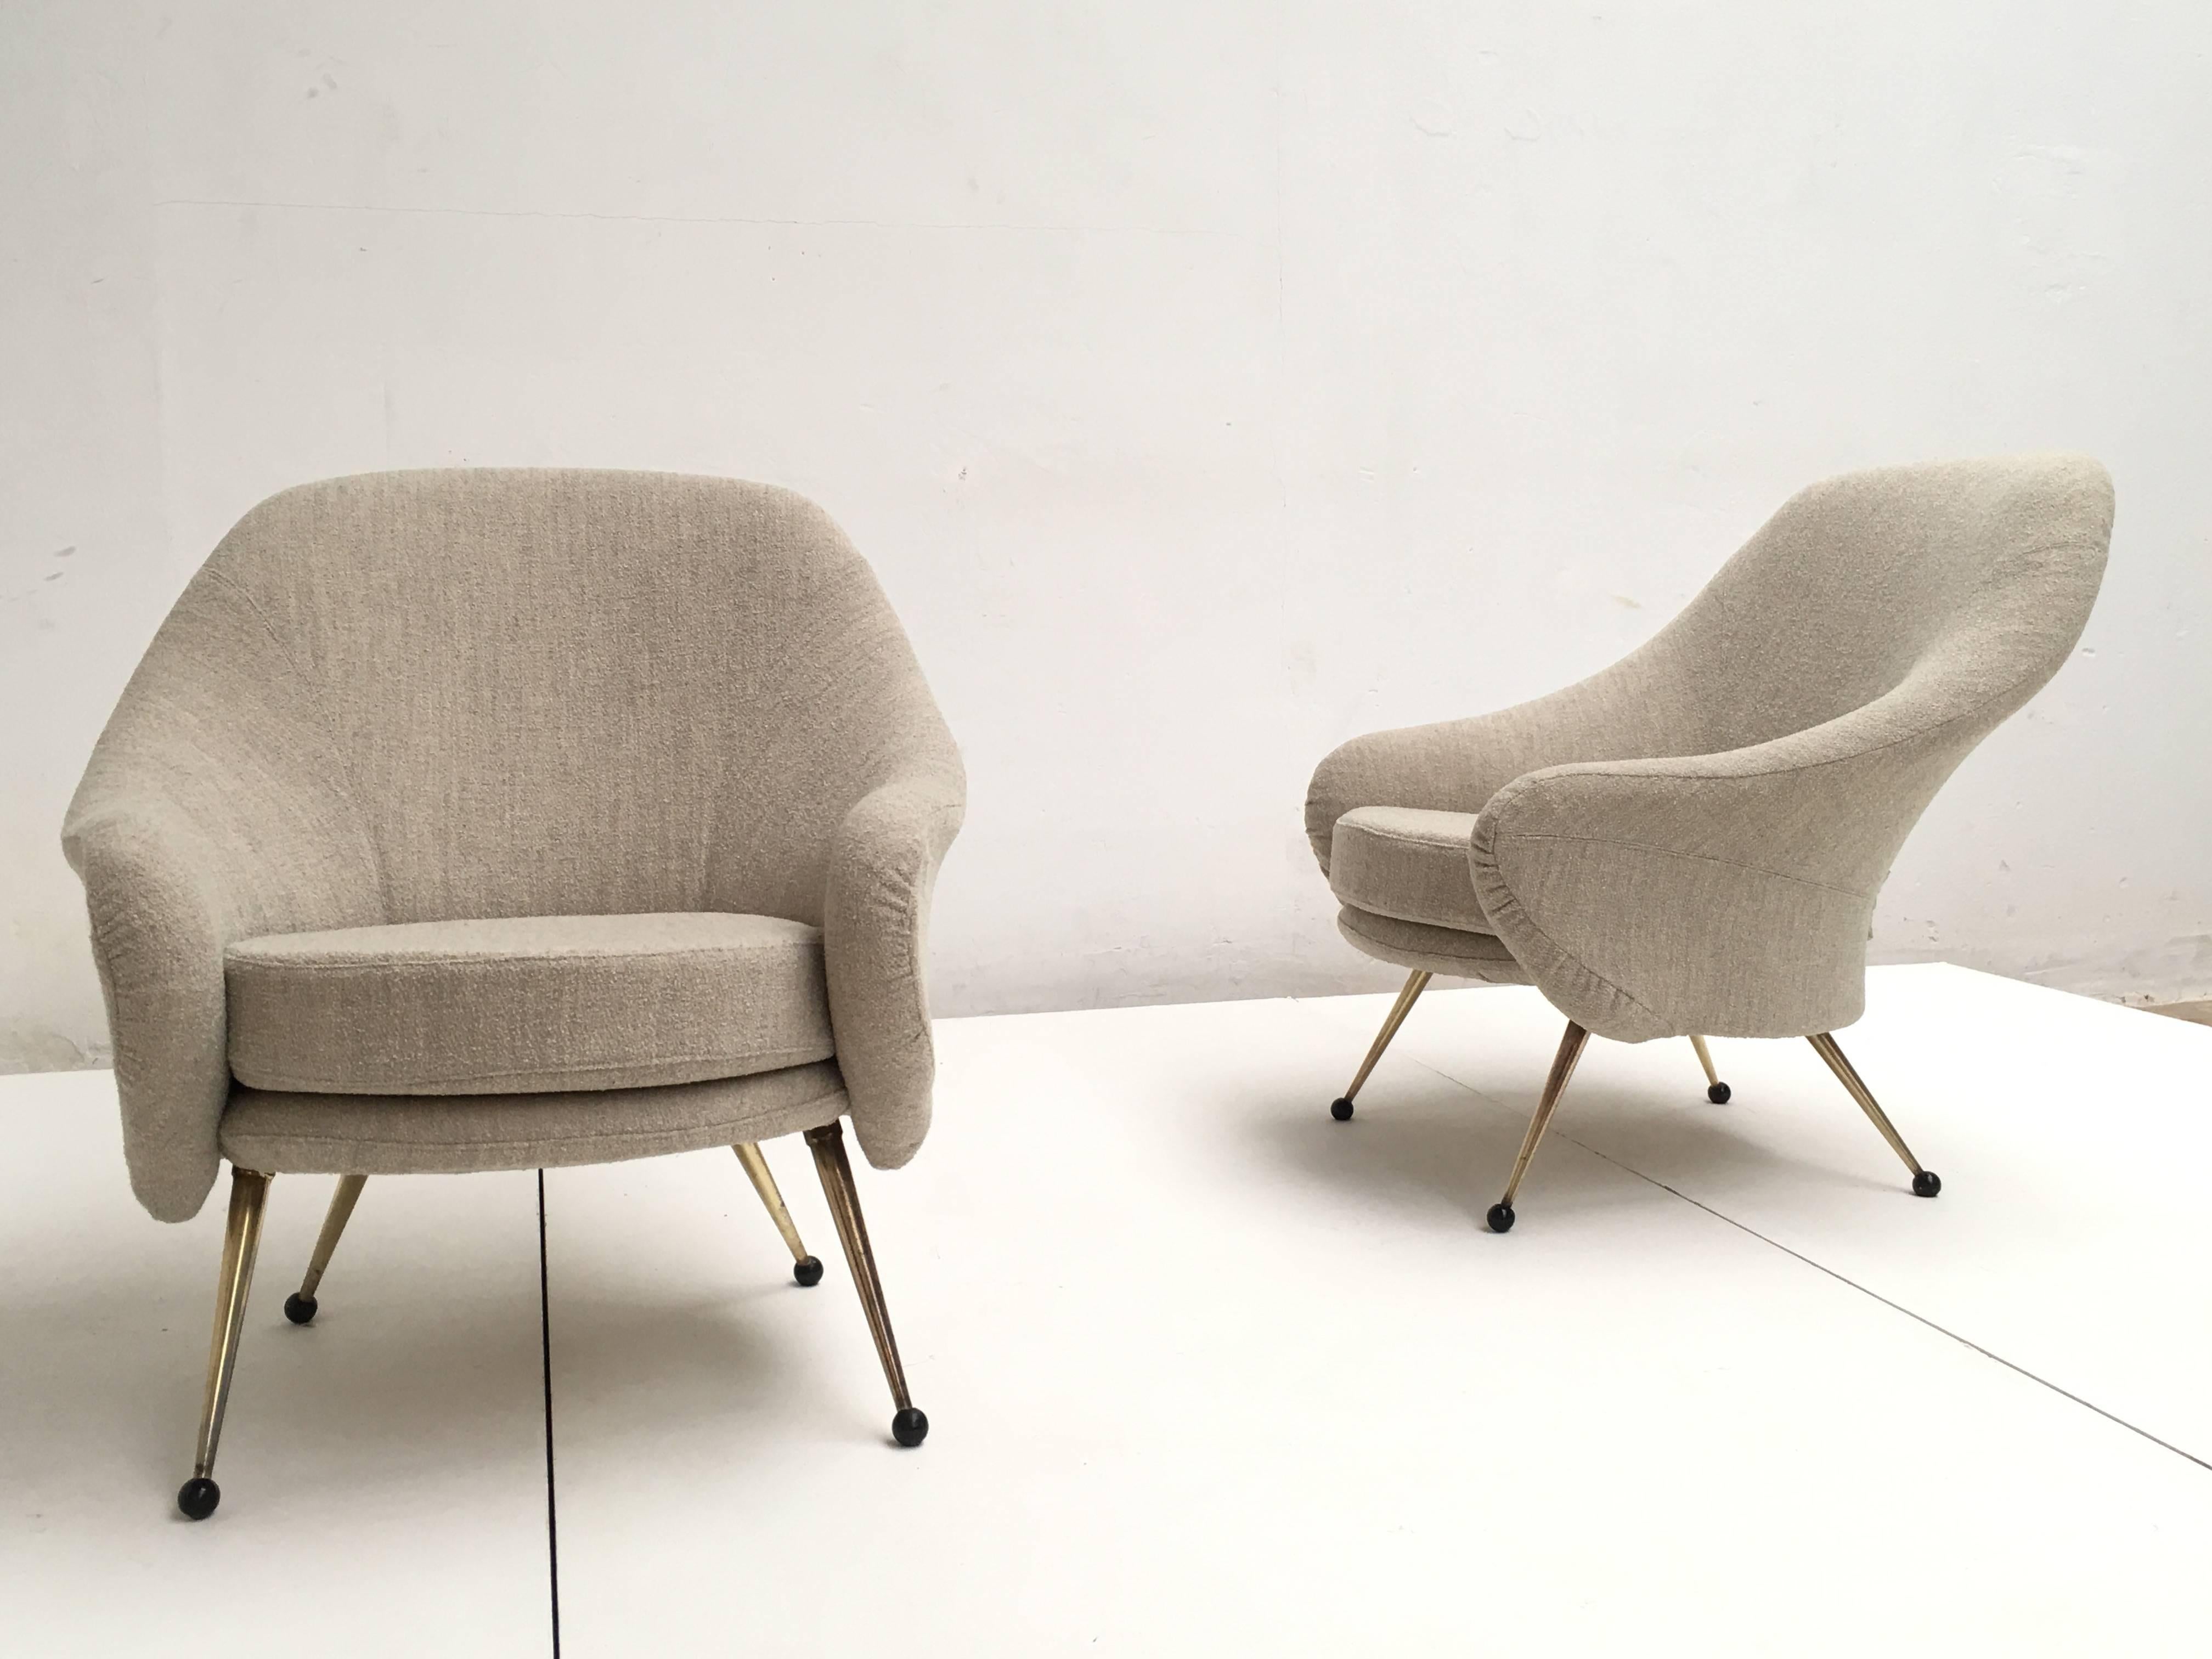 Lovely pair of restored 'Martingala' lounge chairs designed by Marco Zanuso in 1954, for Arflex Italy. These chairs feature elegant brass legs and completely restored upholstery, we managed to save the original, early production period, Arflex